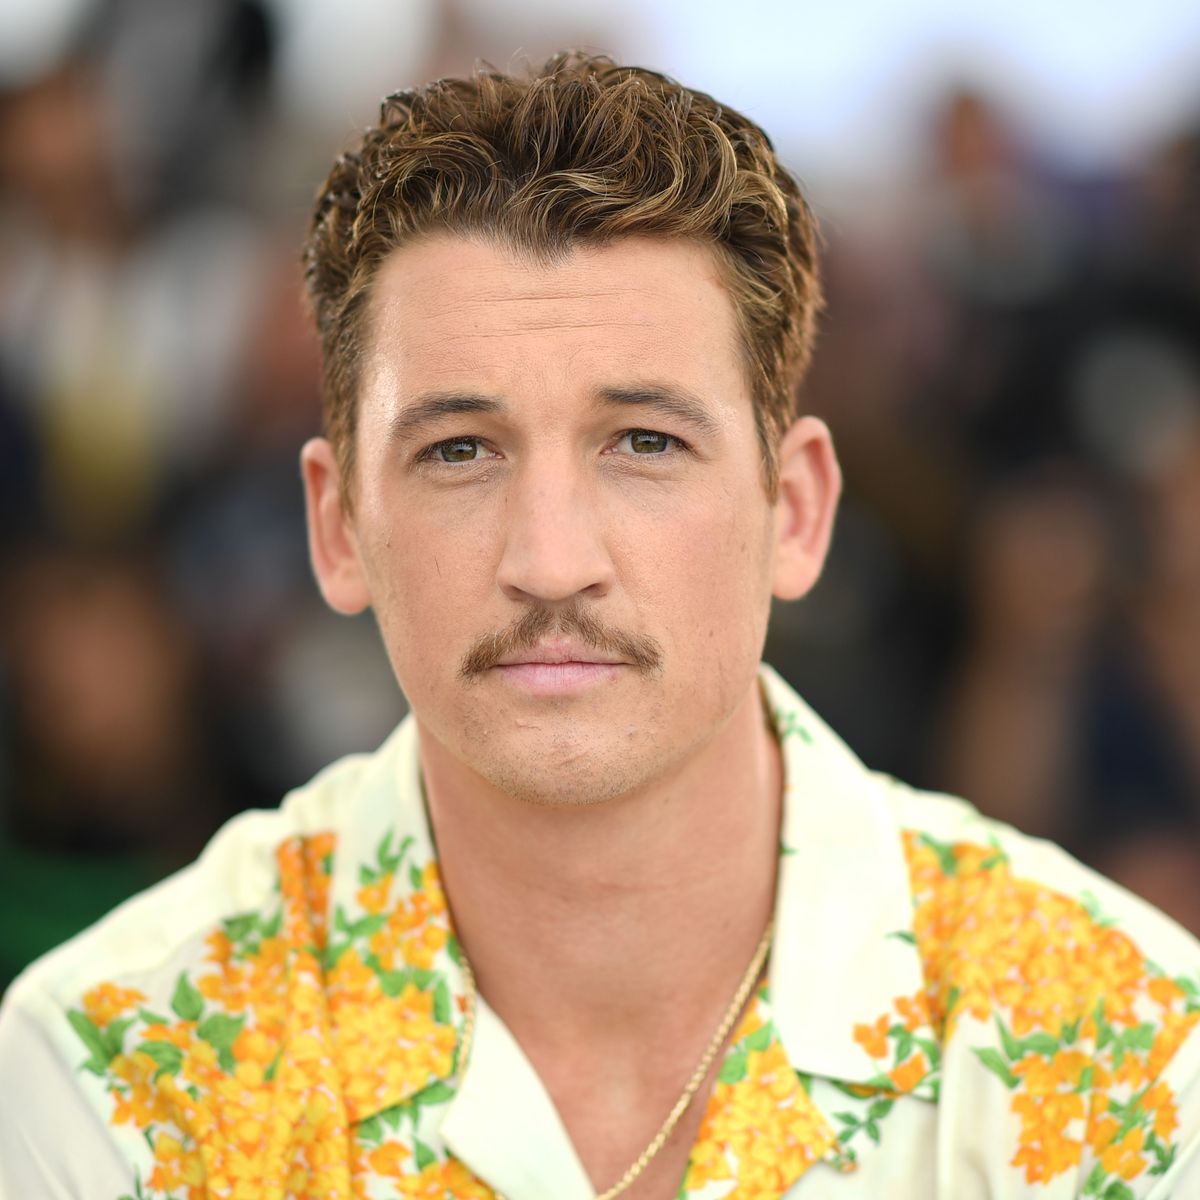 Miles Teller had jet fuel in his blood from Top Gun training, Tom